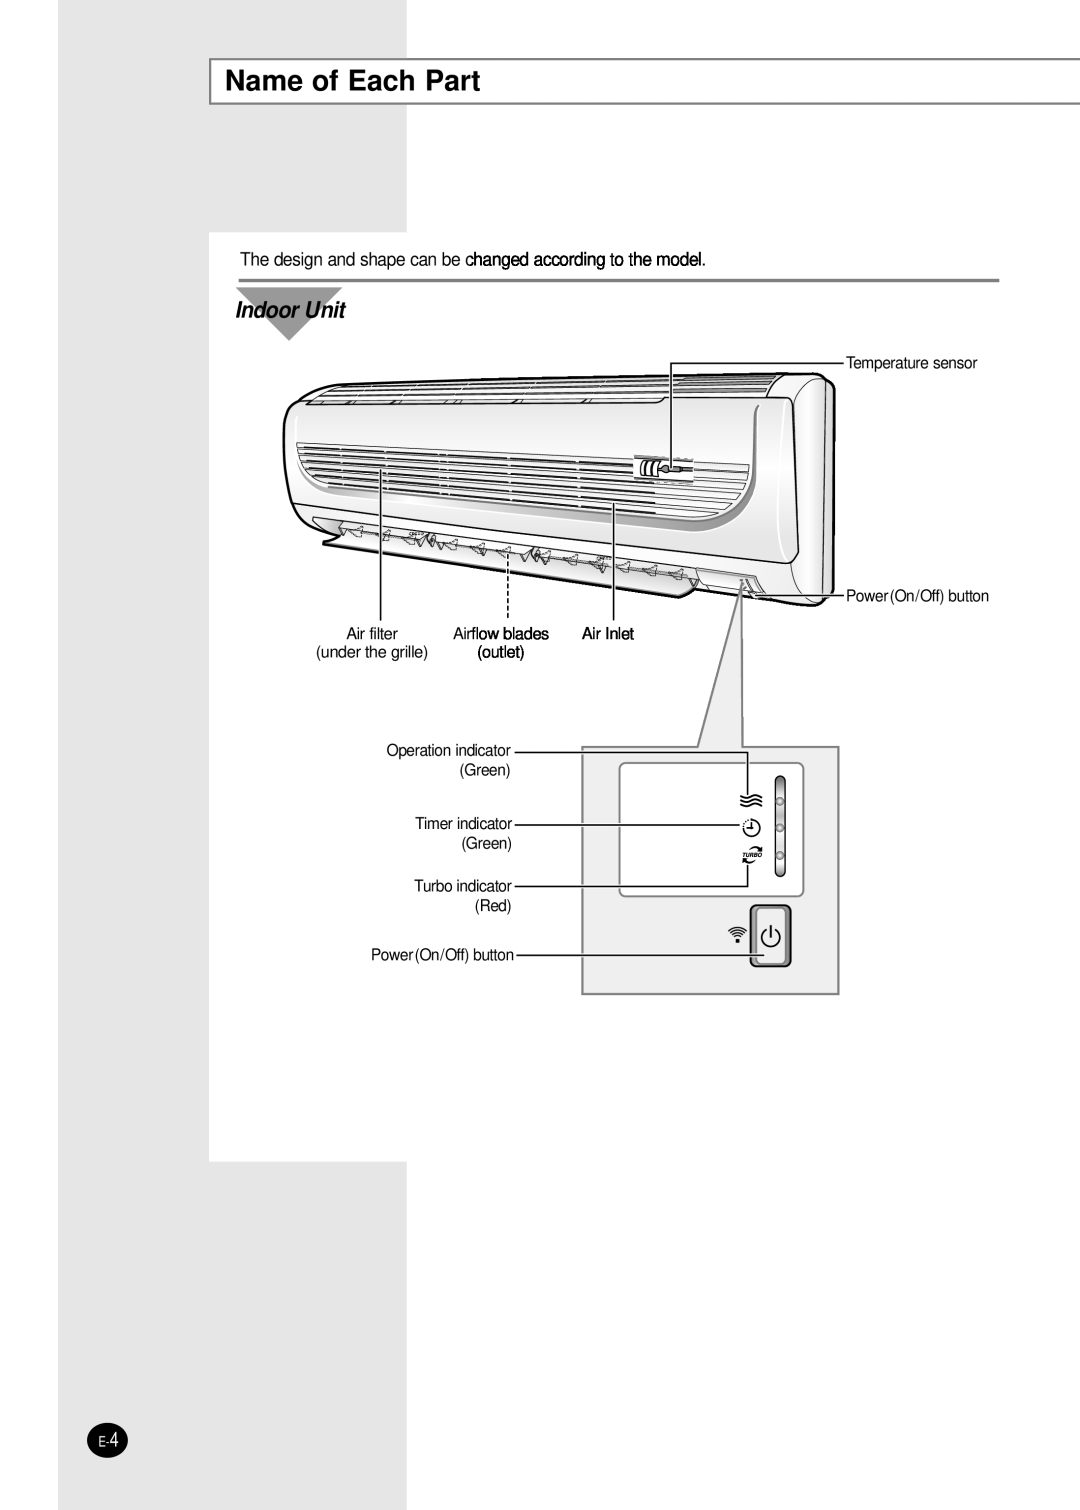 Samsung AQT18WJWE Name of Each Part, Indoor Unit, Air filter, Airflow blades, Air Inlet, under the grille, outlet 